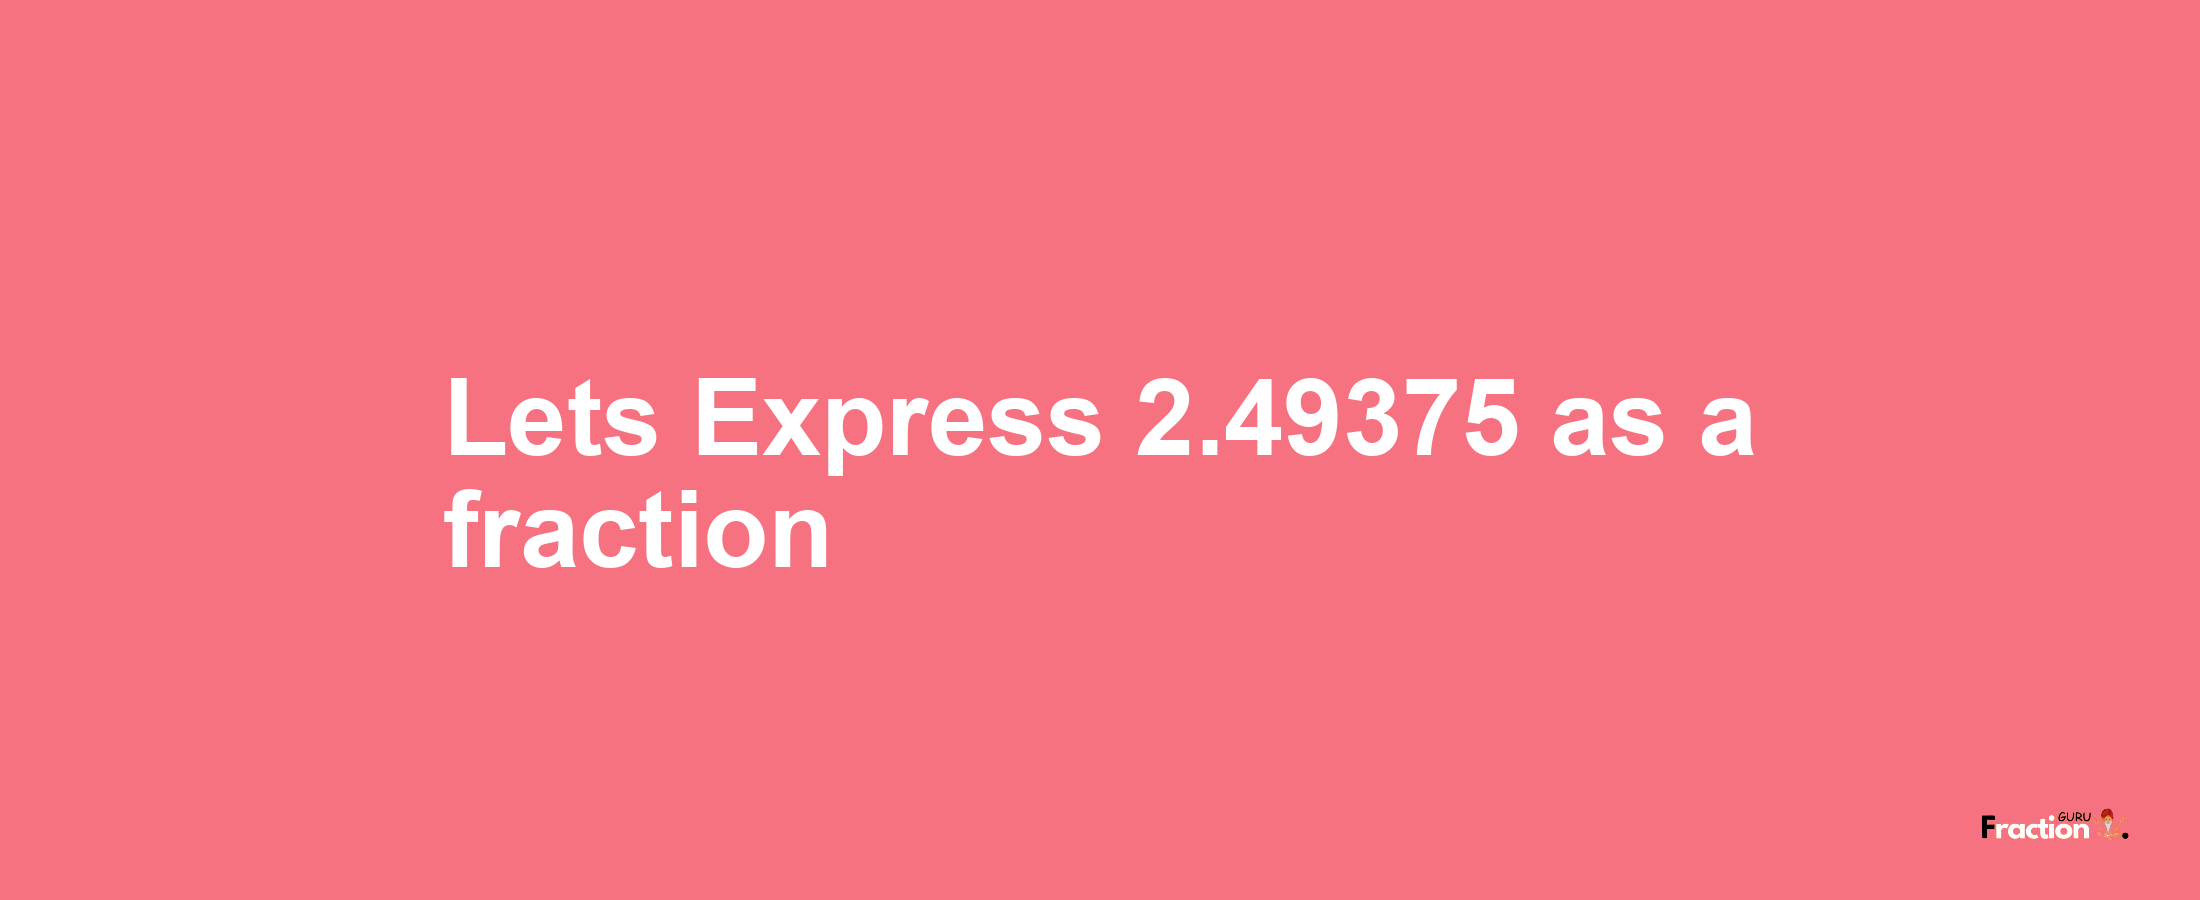 Lets Express 2.49375 as afraction